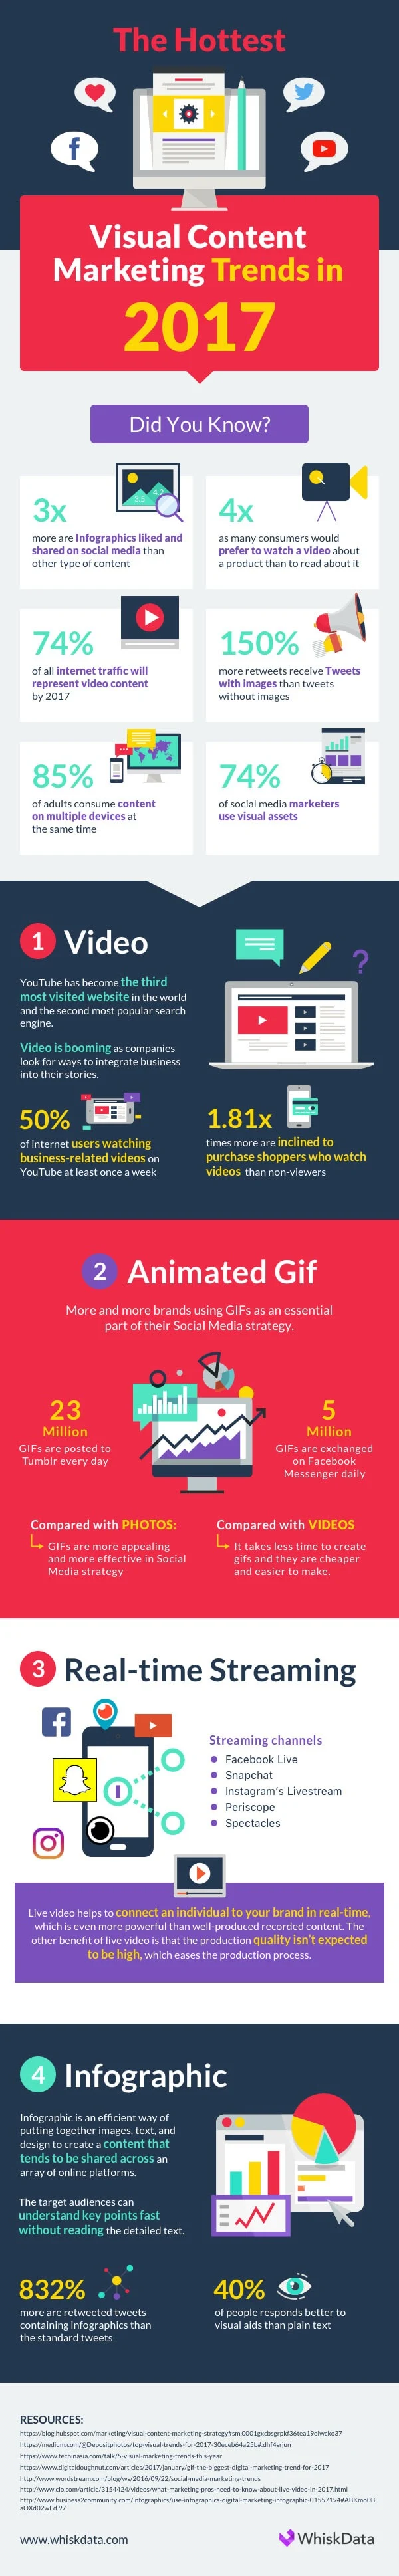 The Hottest Visual Content Marketing Trends for 2017 [infographic]